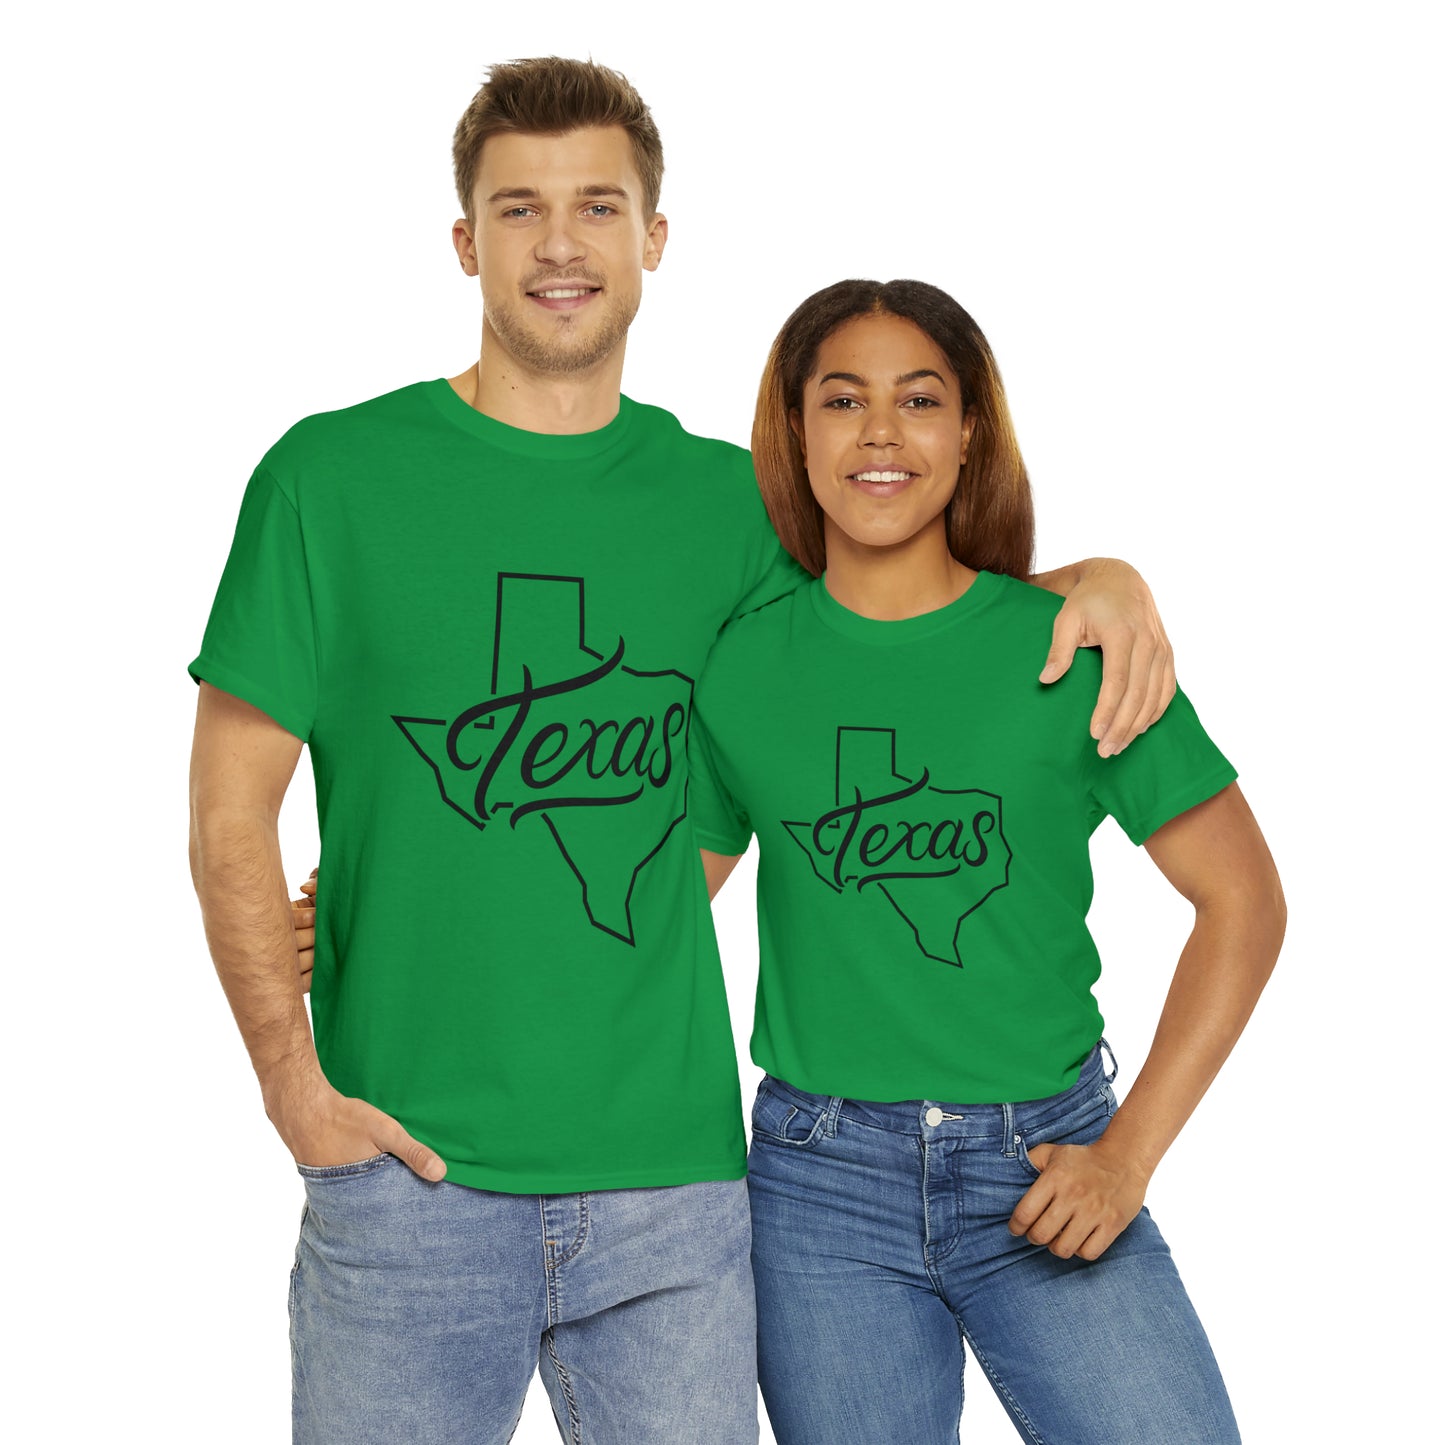 Texas T-Shirt, Father's Day Gift, Dad Jokes, Dad Shirt, Shirt for Dad, Dad Birthday Gift, Dad Jokes, Funny Father's Day Gift, Unisex Tee